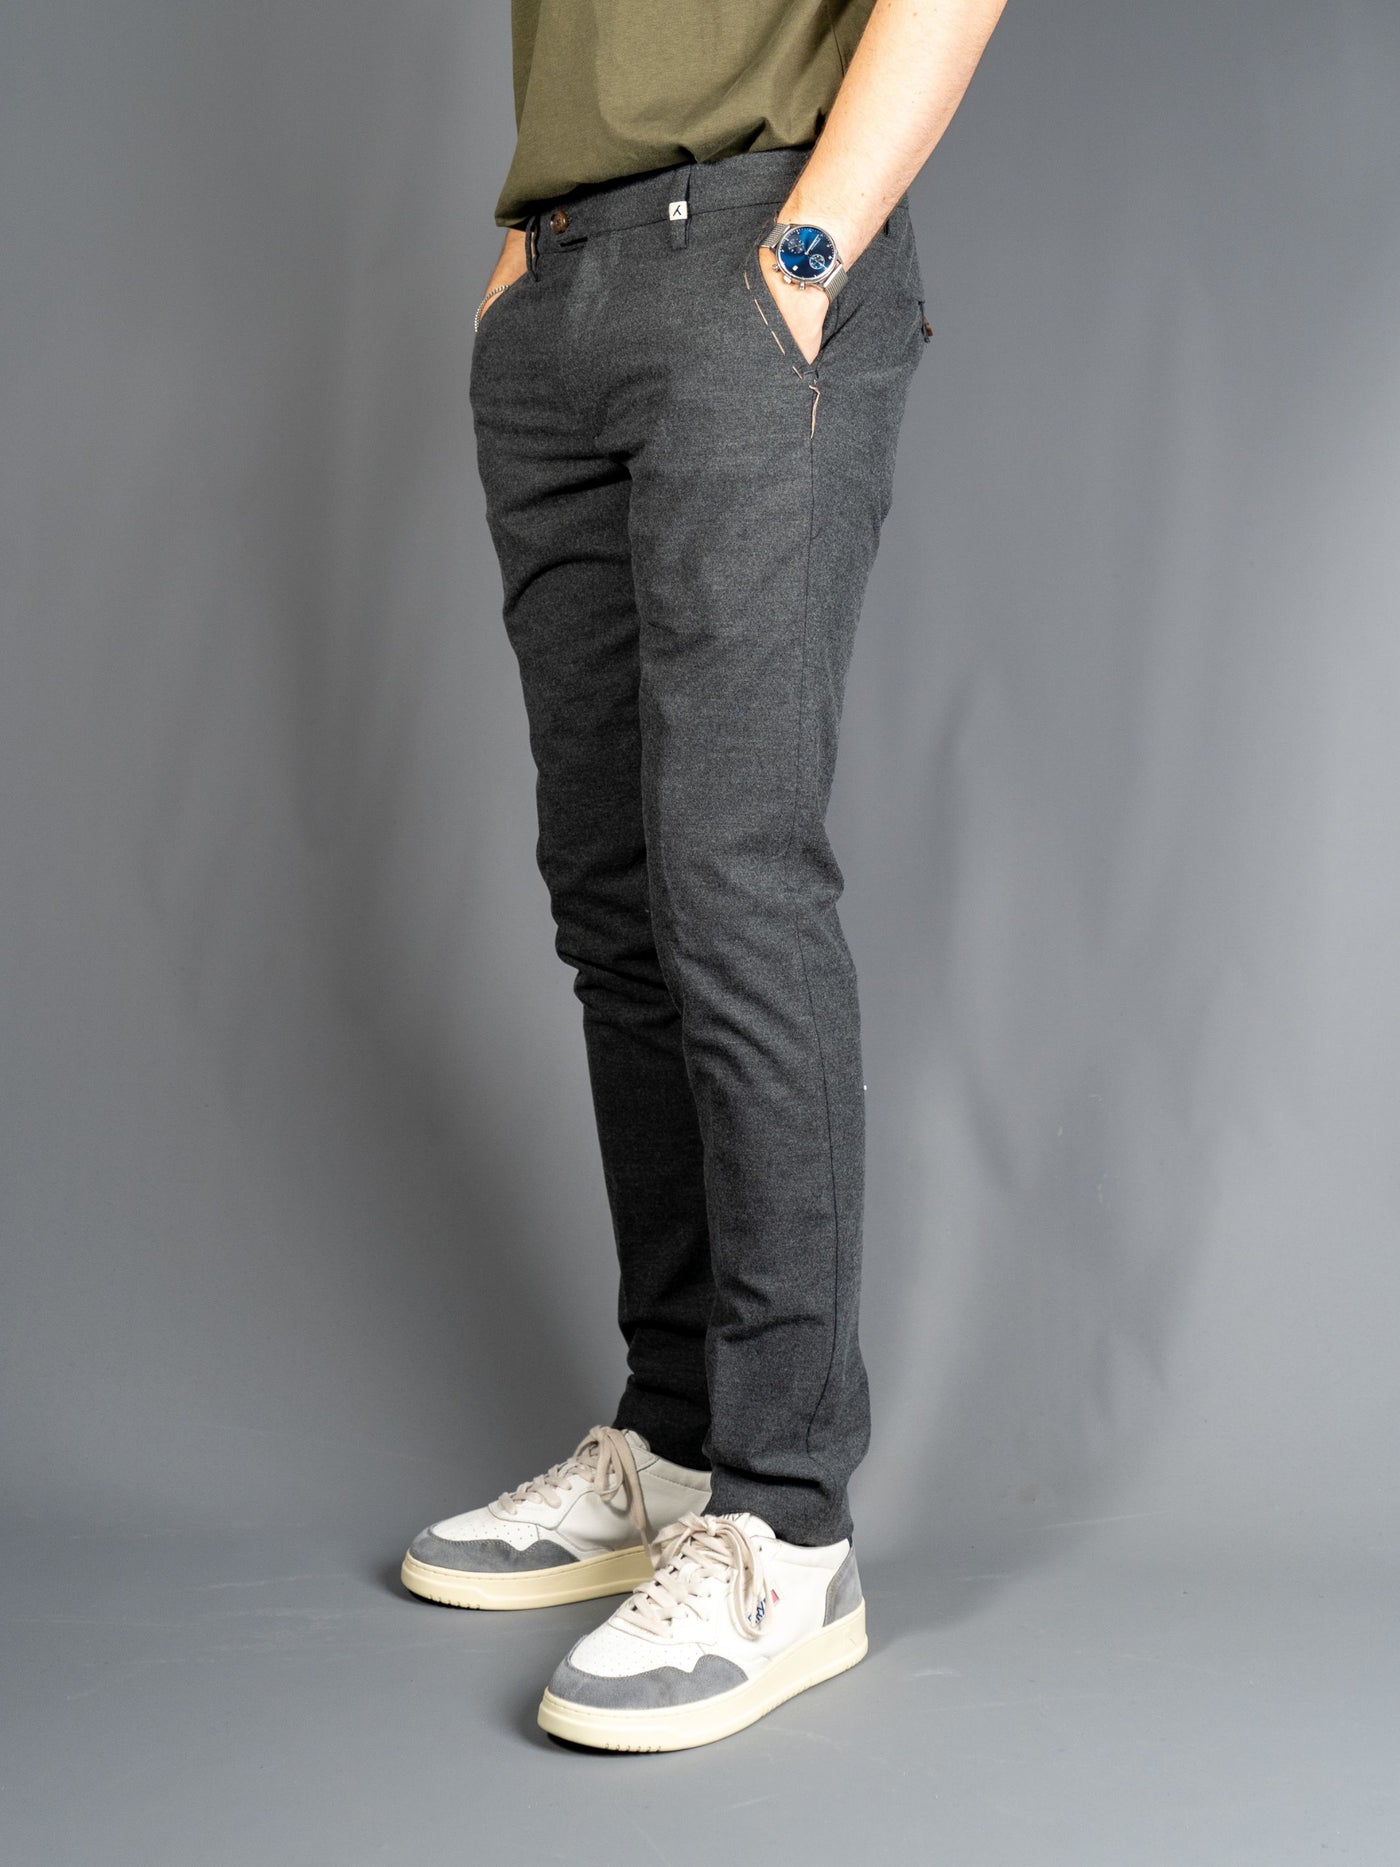 Giove Slim Fit Flannel Stretch Pants - Grå